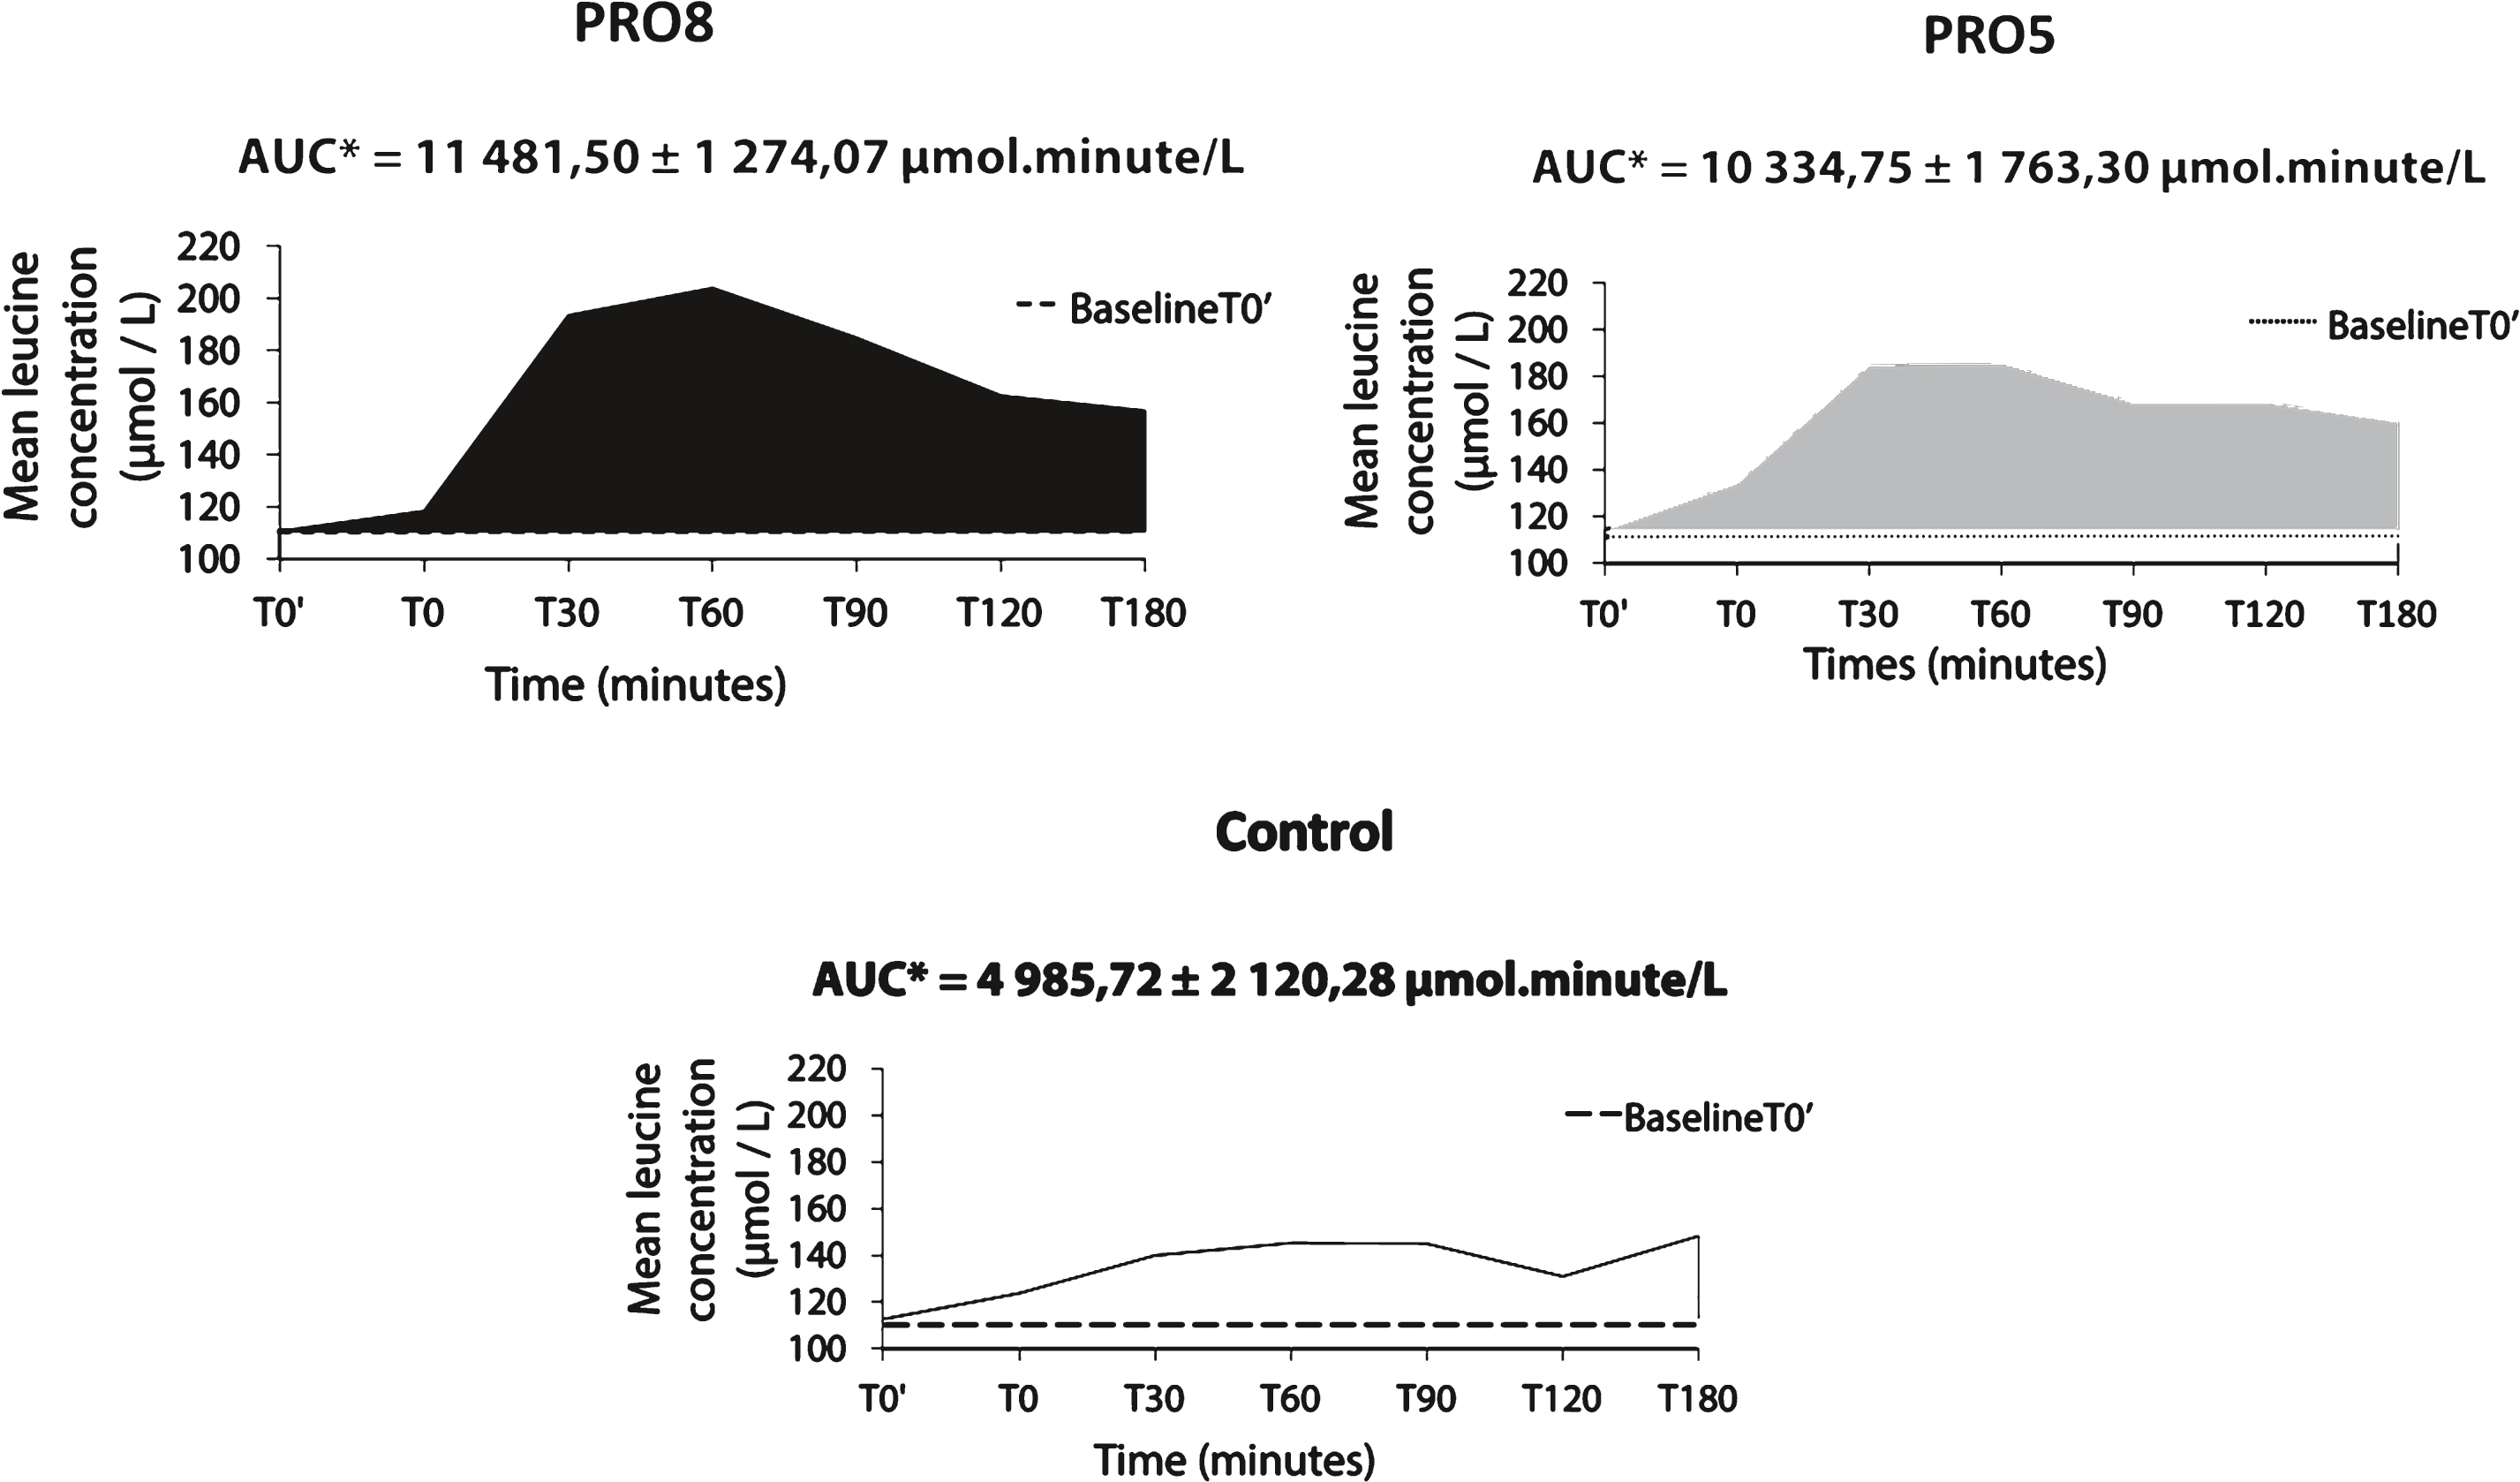 Leucine AUC was 2.3× and 2.1× higher for PRO8 and PRO5 respectively compared to the control meal.